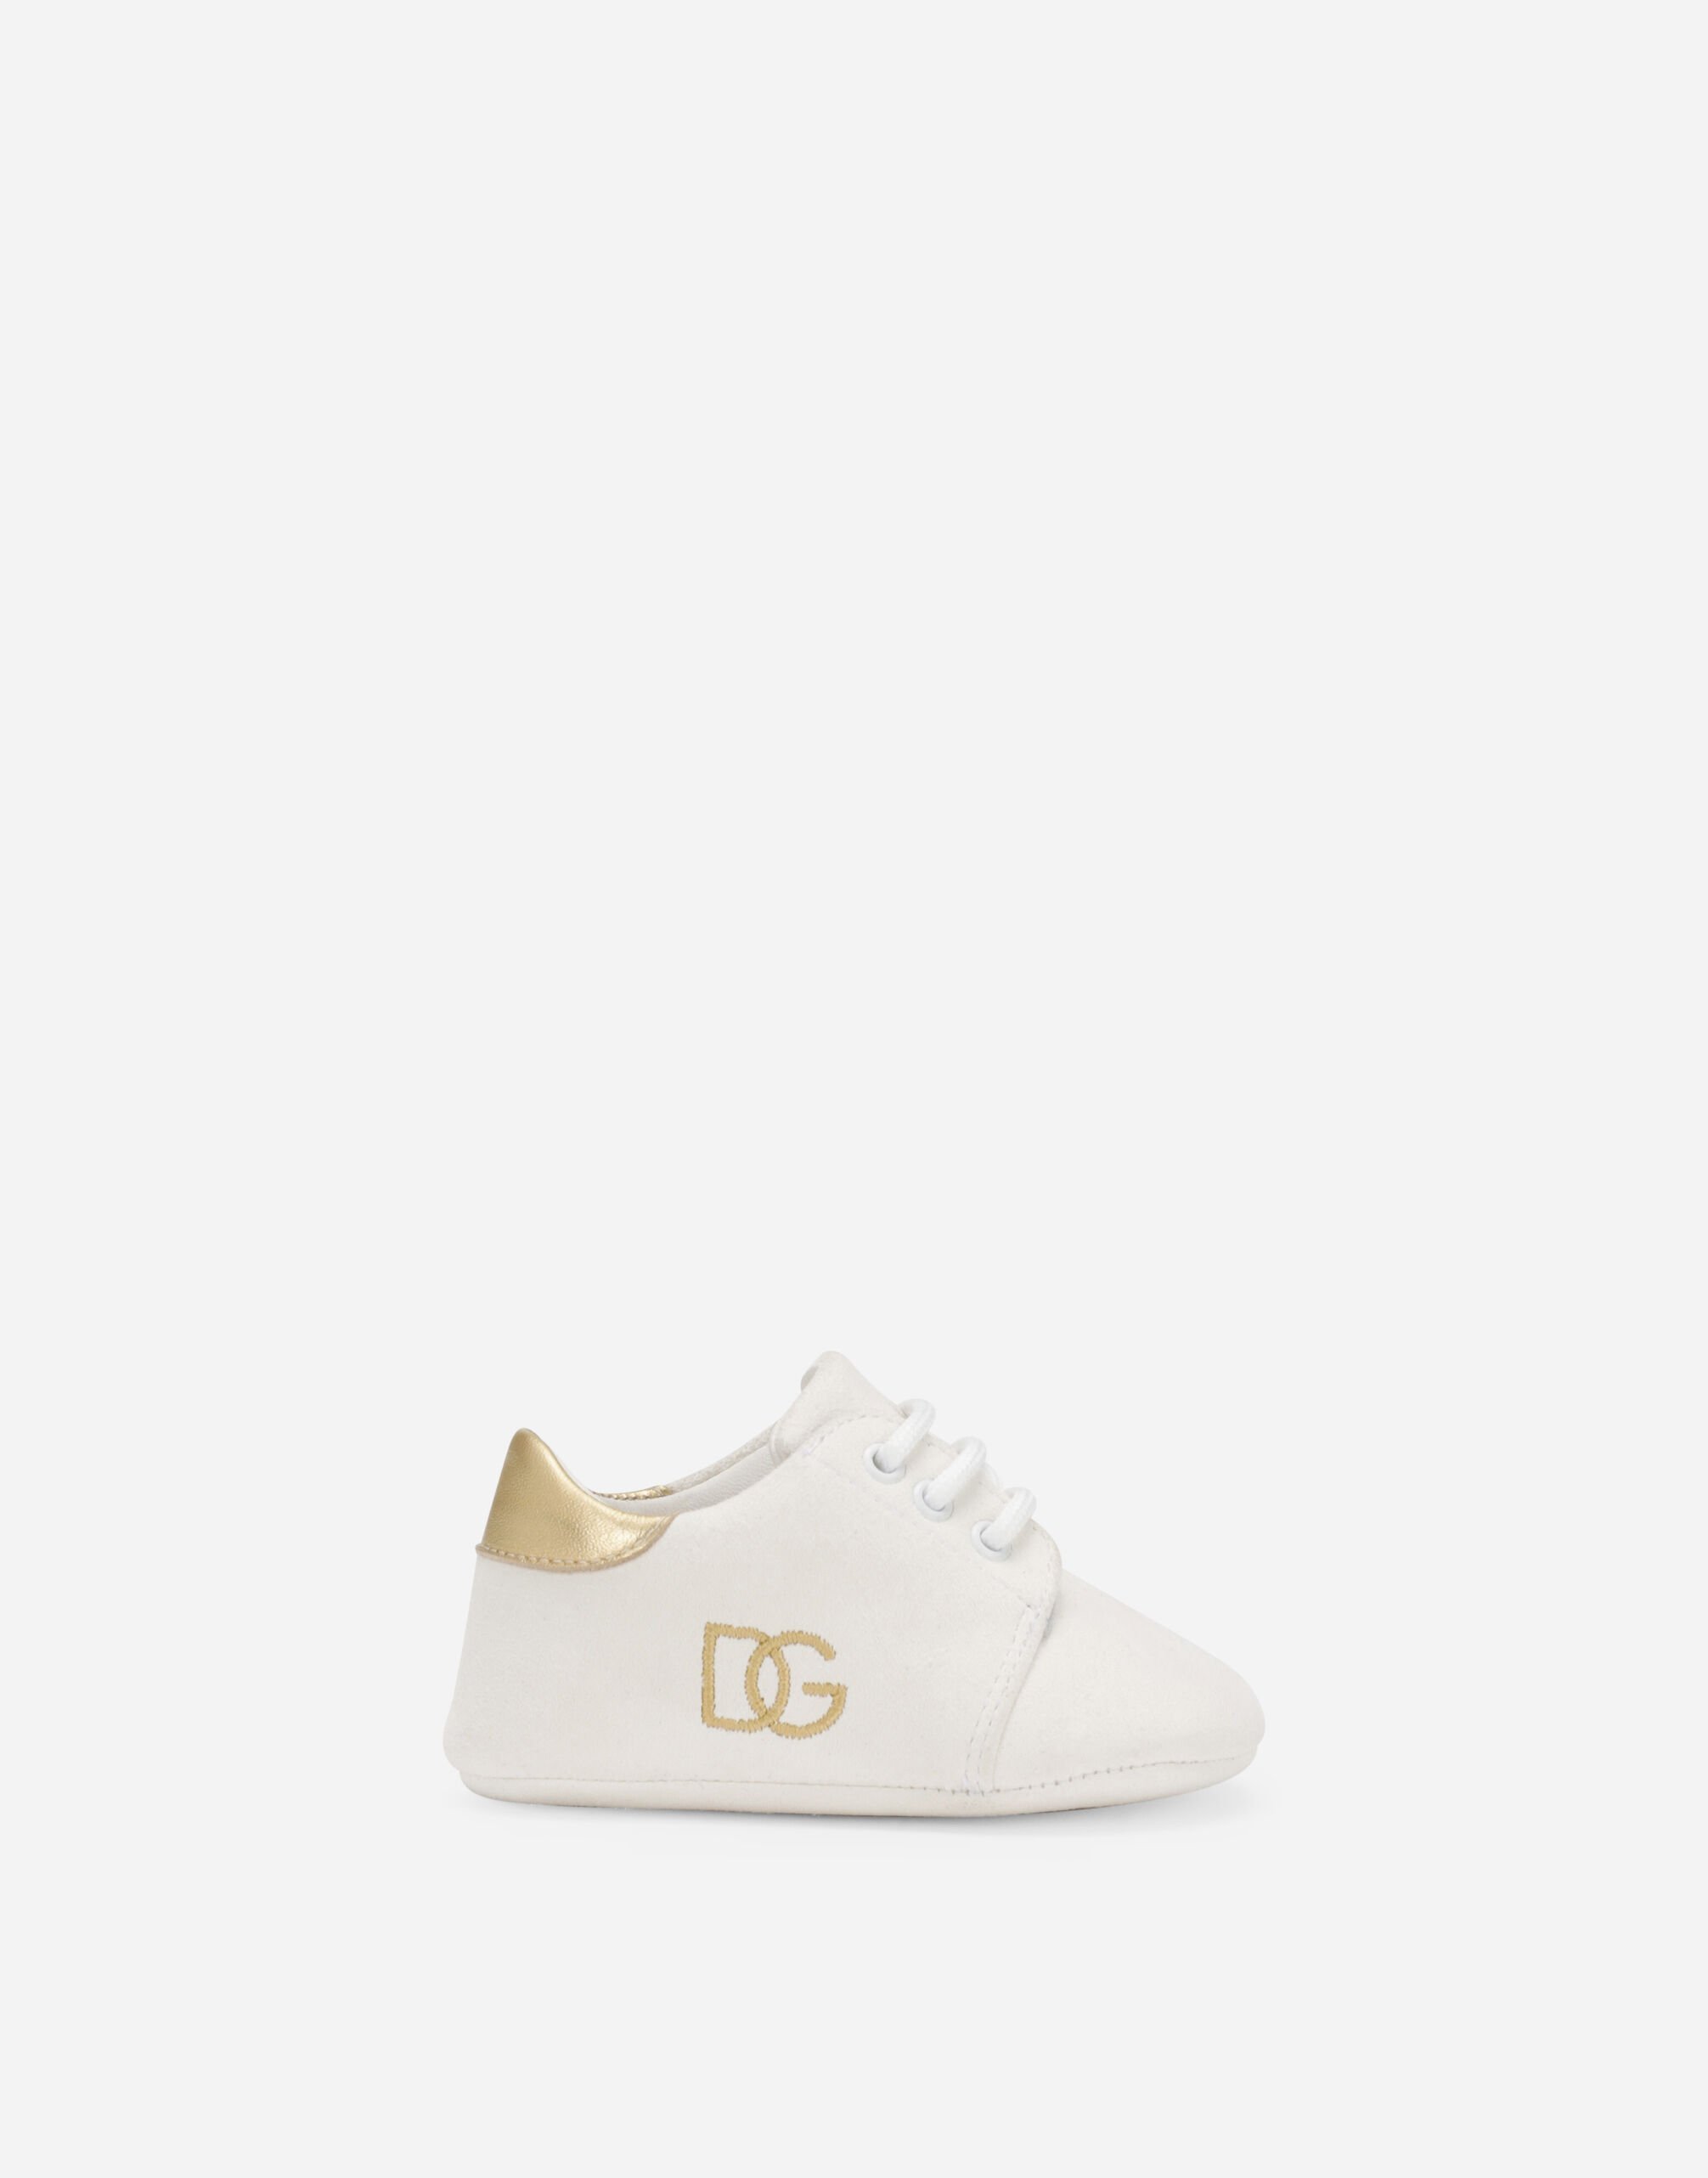 Dolce&Gabbana Suede sneakers with DG logo embroidery White DK0147A1850